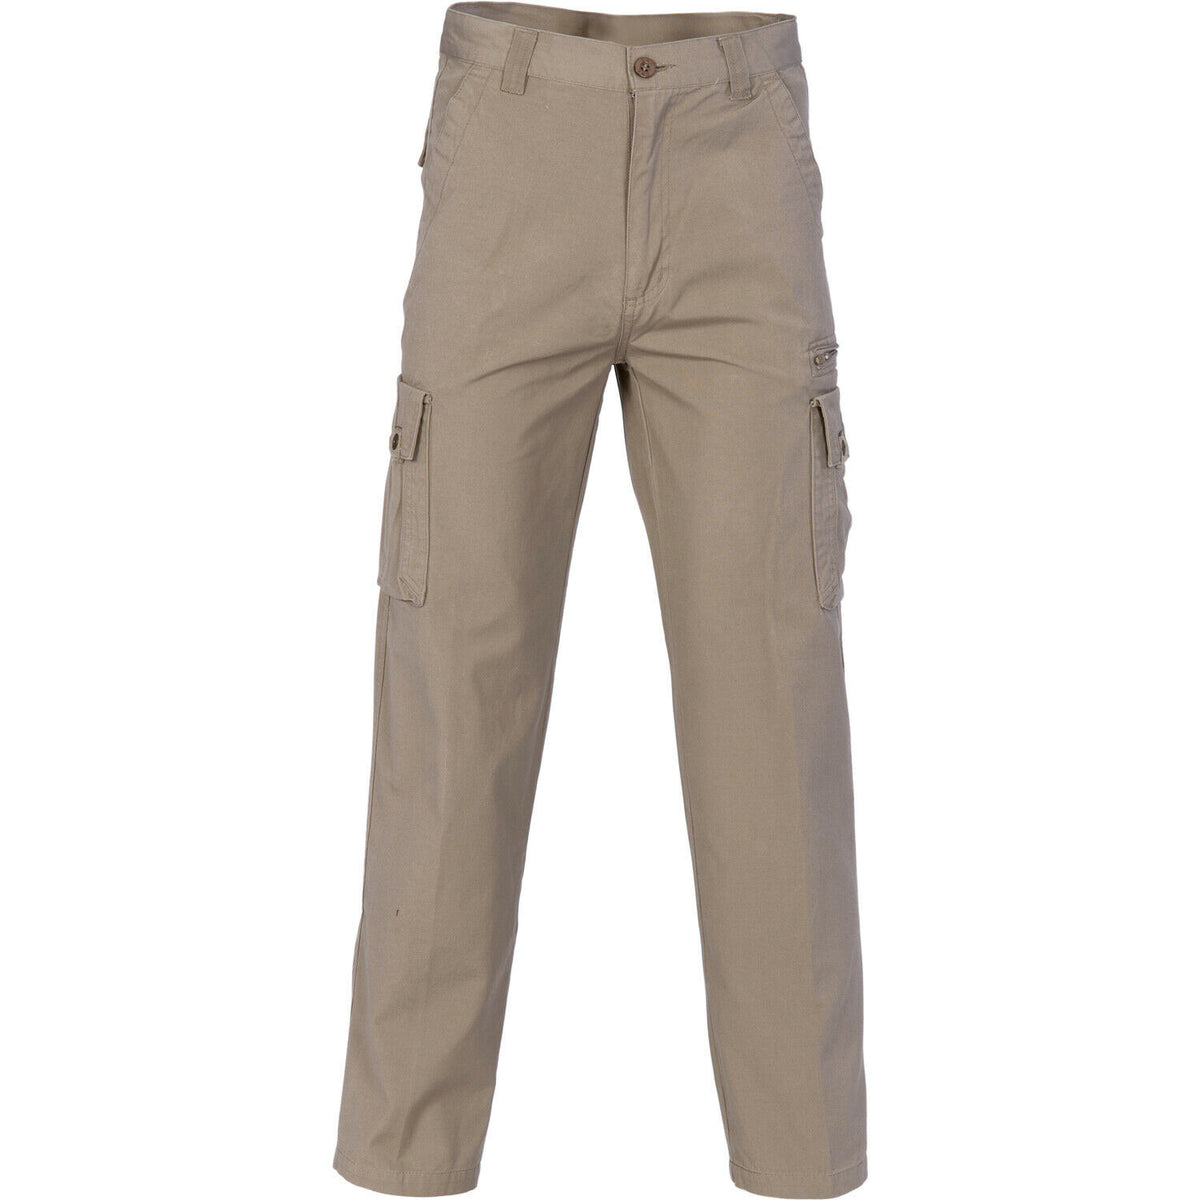 DNC Workwear Mens Island Cotton Duck Weave Cargo Pants Comfortable Work 4535-Collins Clothing Co